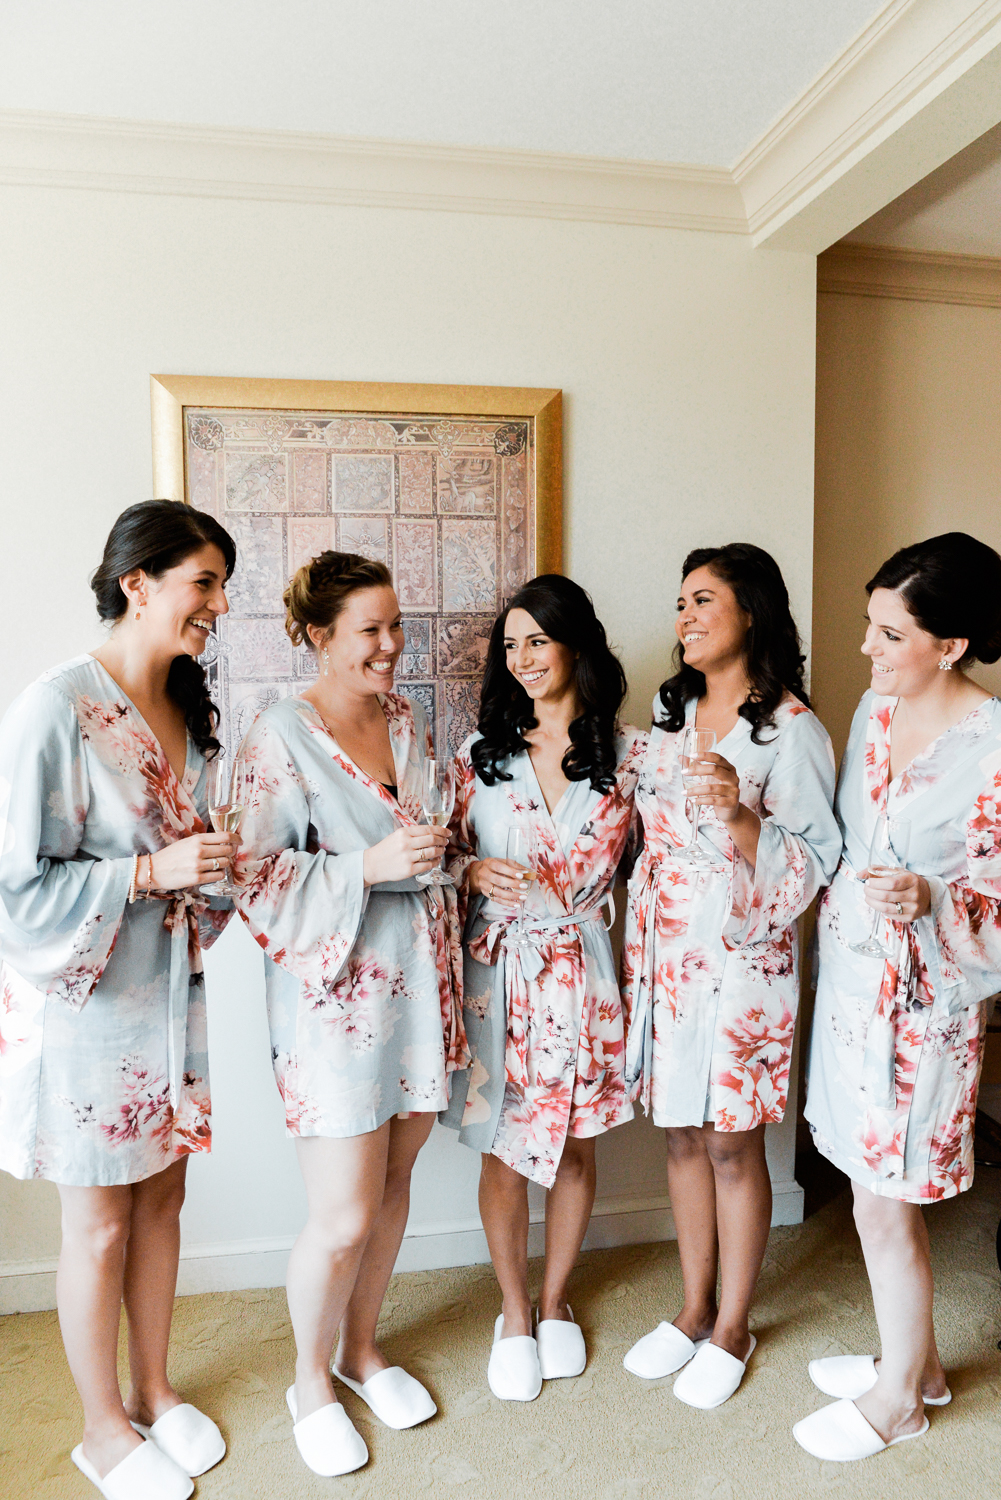 Blue and Pink bridesmaids robes with flowers